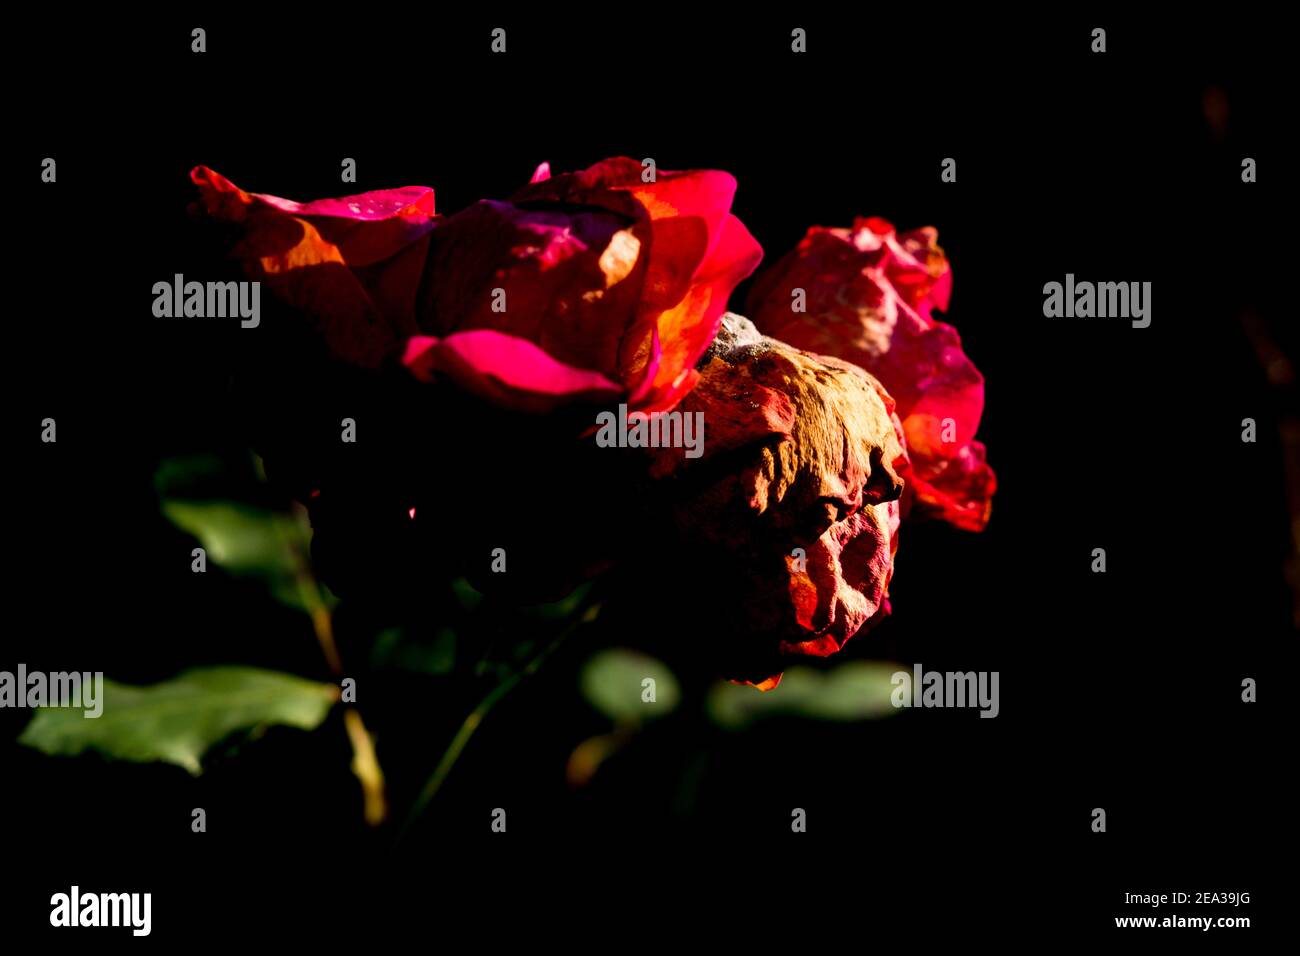 Brunswick, Germany. 30th Nov, 2020. Fresh rose blossoms hang on a bush next to an already wilted blossom. Credit: Stefan Jaitner/dpa/Alamy Live News Stock Photo